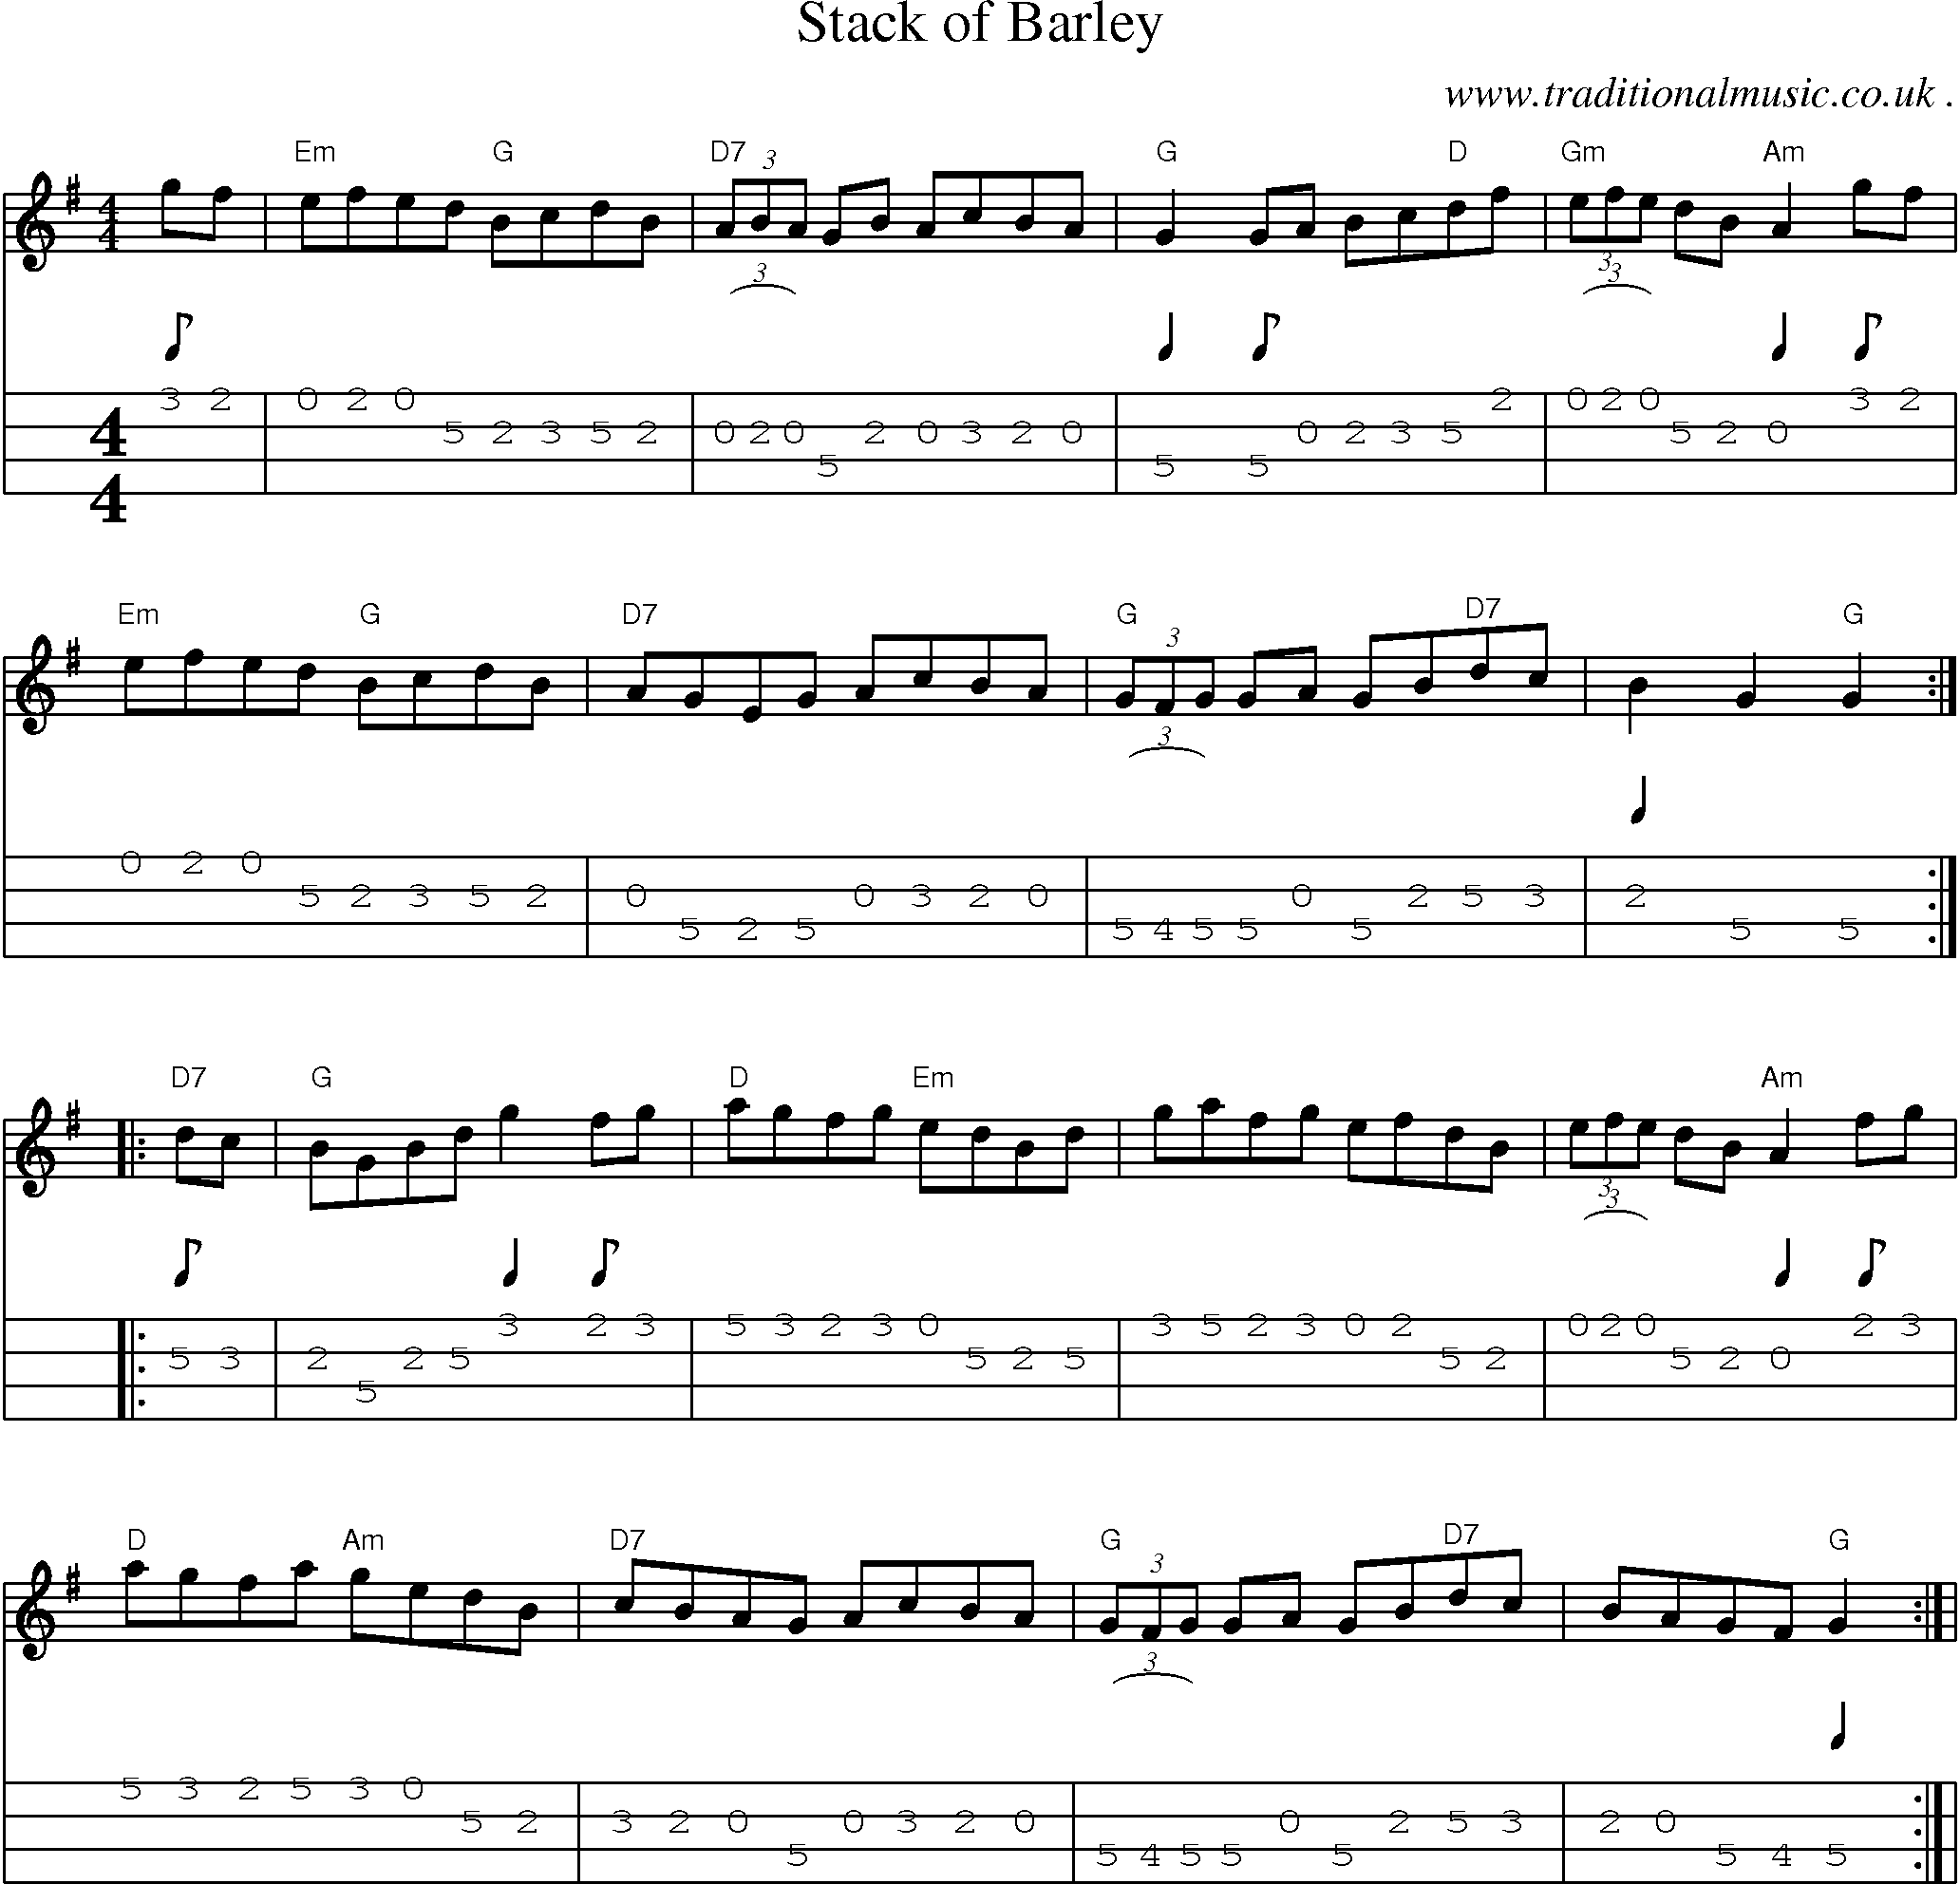 Music Score and Guitar Tabs for Stack Of Barley